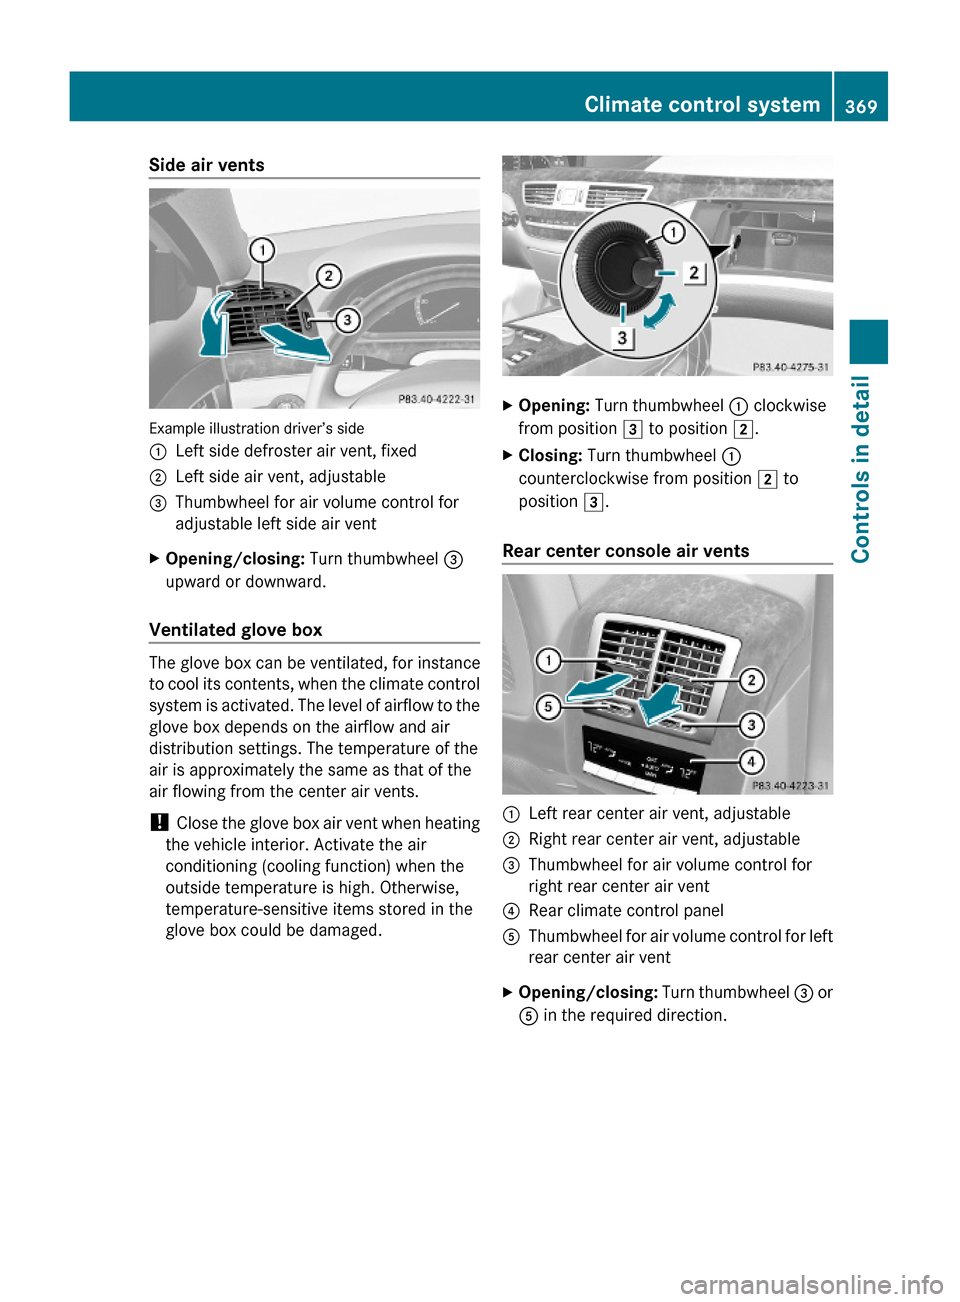 MERCEDES-BENZ S63AMG 2010 W221 Owners Manual Side air vents
Example illustration driver’s side
:Left side defroster air vent, fixed;Left side air vent, adjustable=Thumbwheel for air volume control for
adjustable left side air vent
XOpening/clo